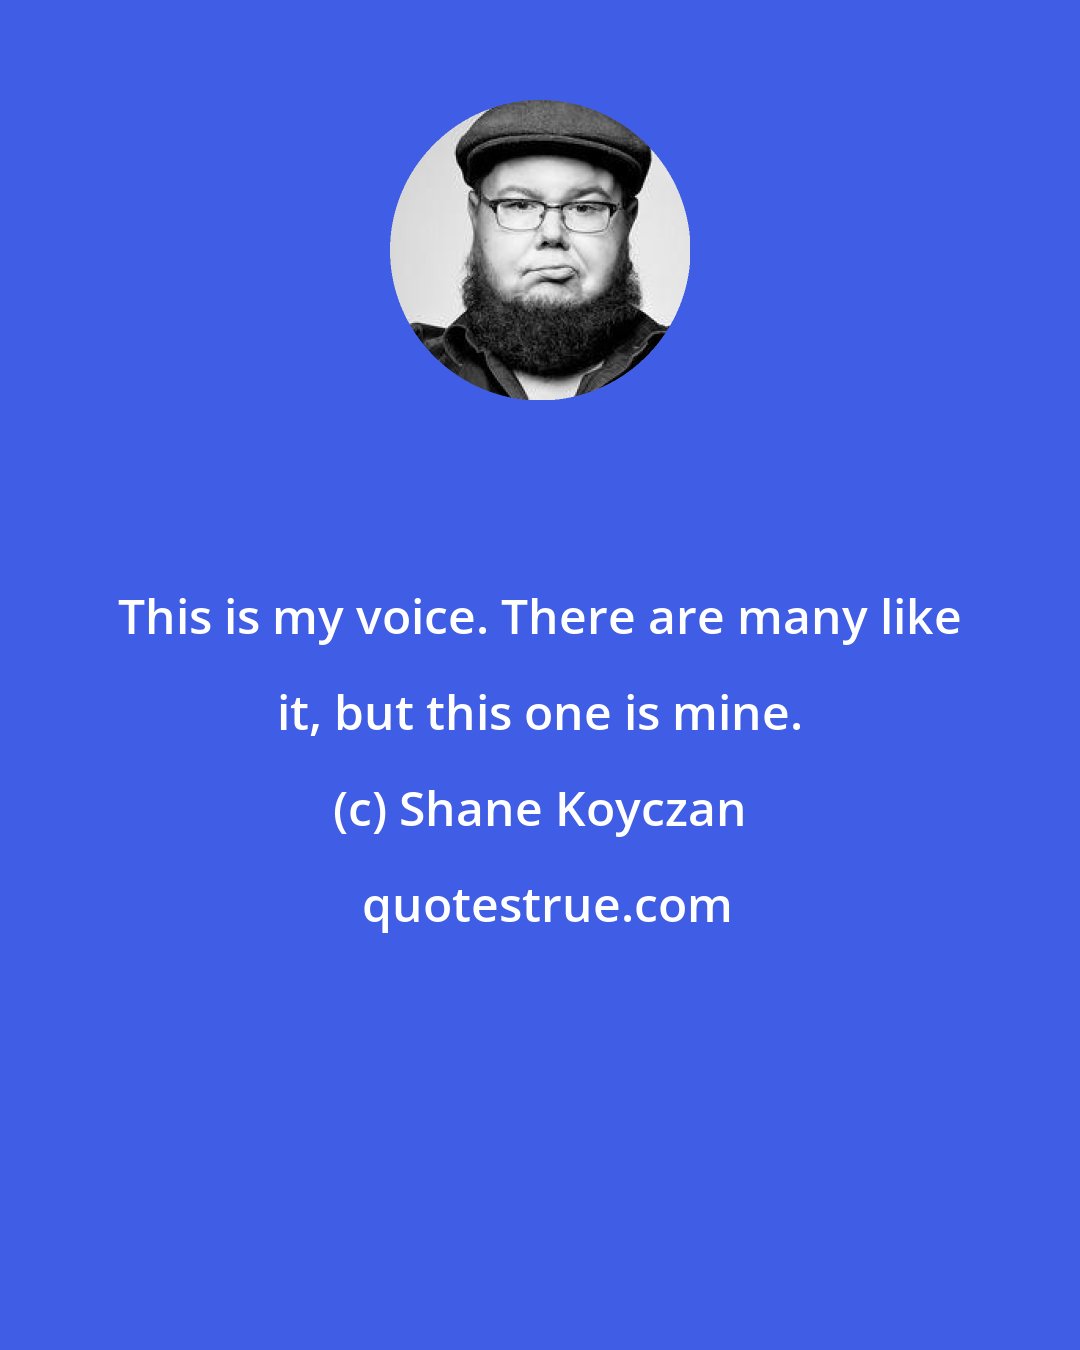 Shane Koyczan: This is my voice. There are many like it, but this one is mine.